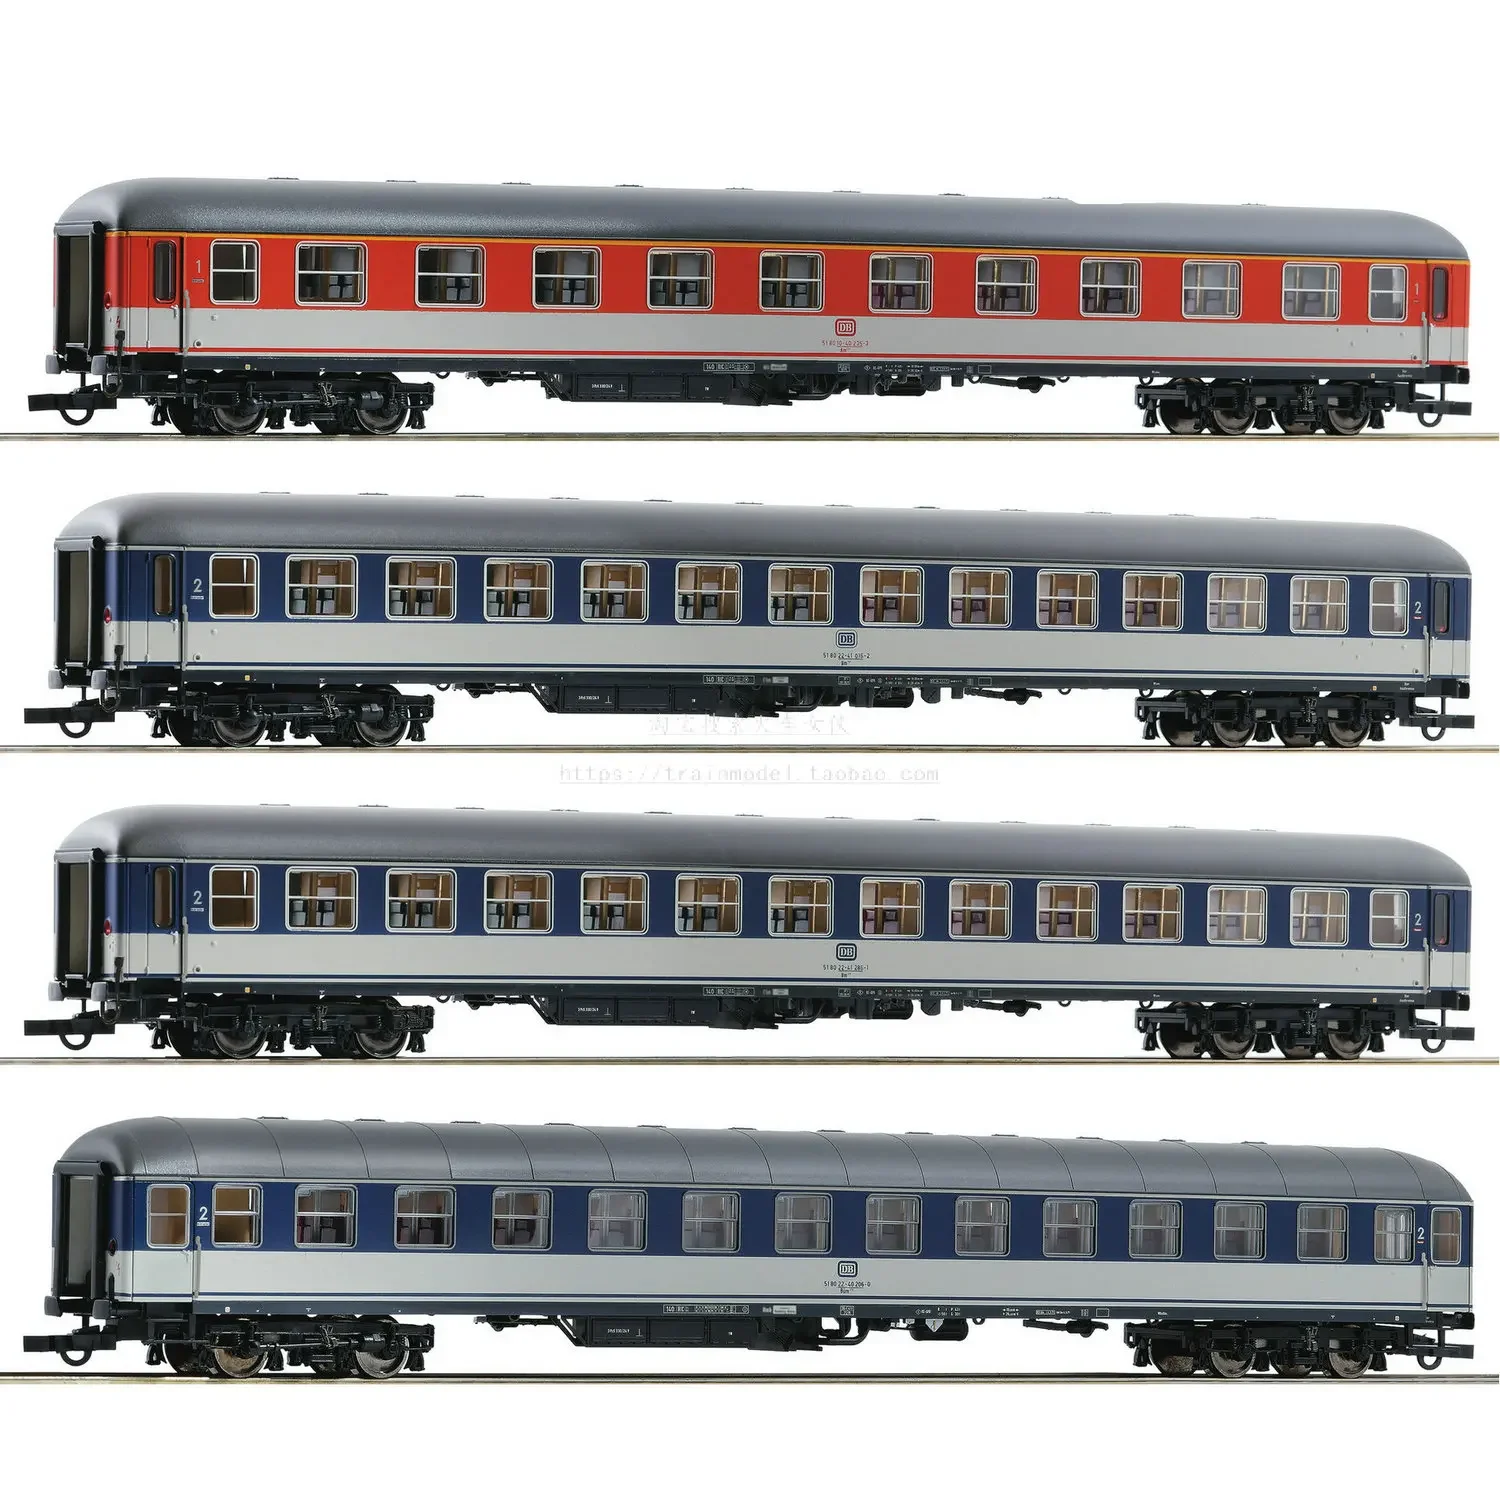 

Diecast 1:87 Scale European ROCO HO 74025 German DB Fourth Passenger Car Four Muenster Line 4pc Train Model Collection Toy Gift